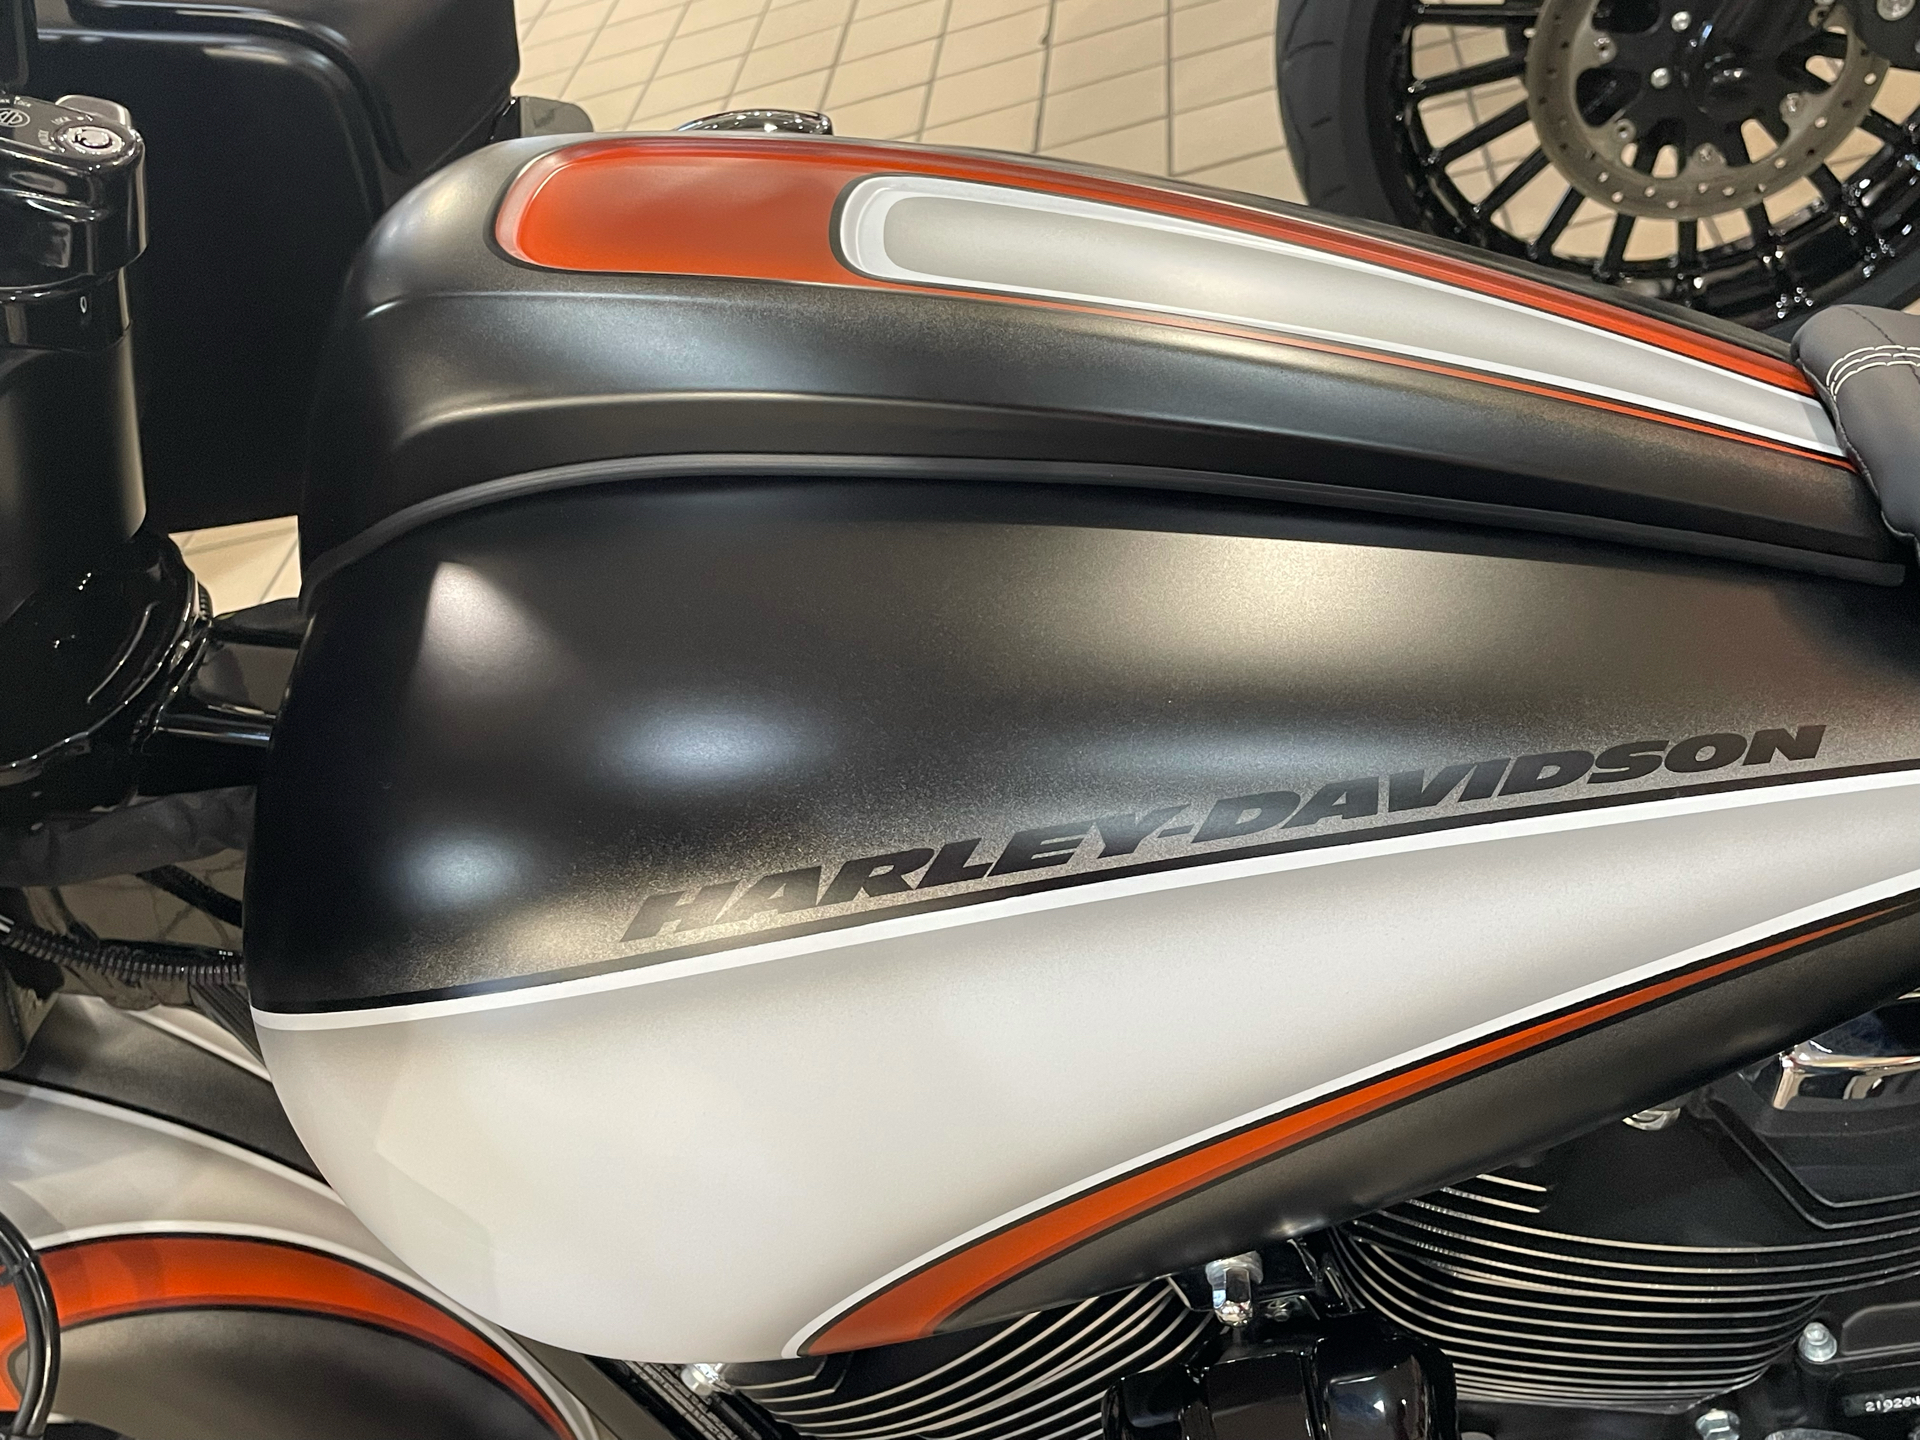 2021 Harley-Davidson Road Glide® Special in Dumfries, Virginia - Photo 9